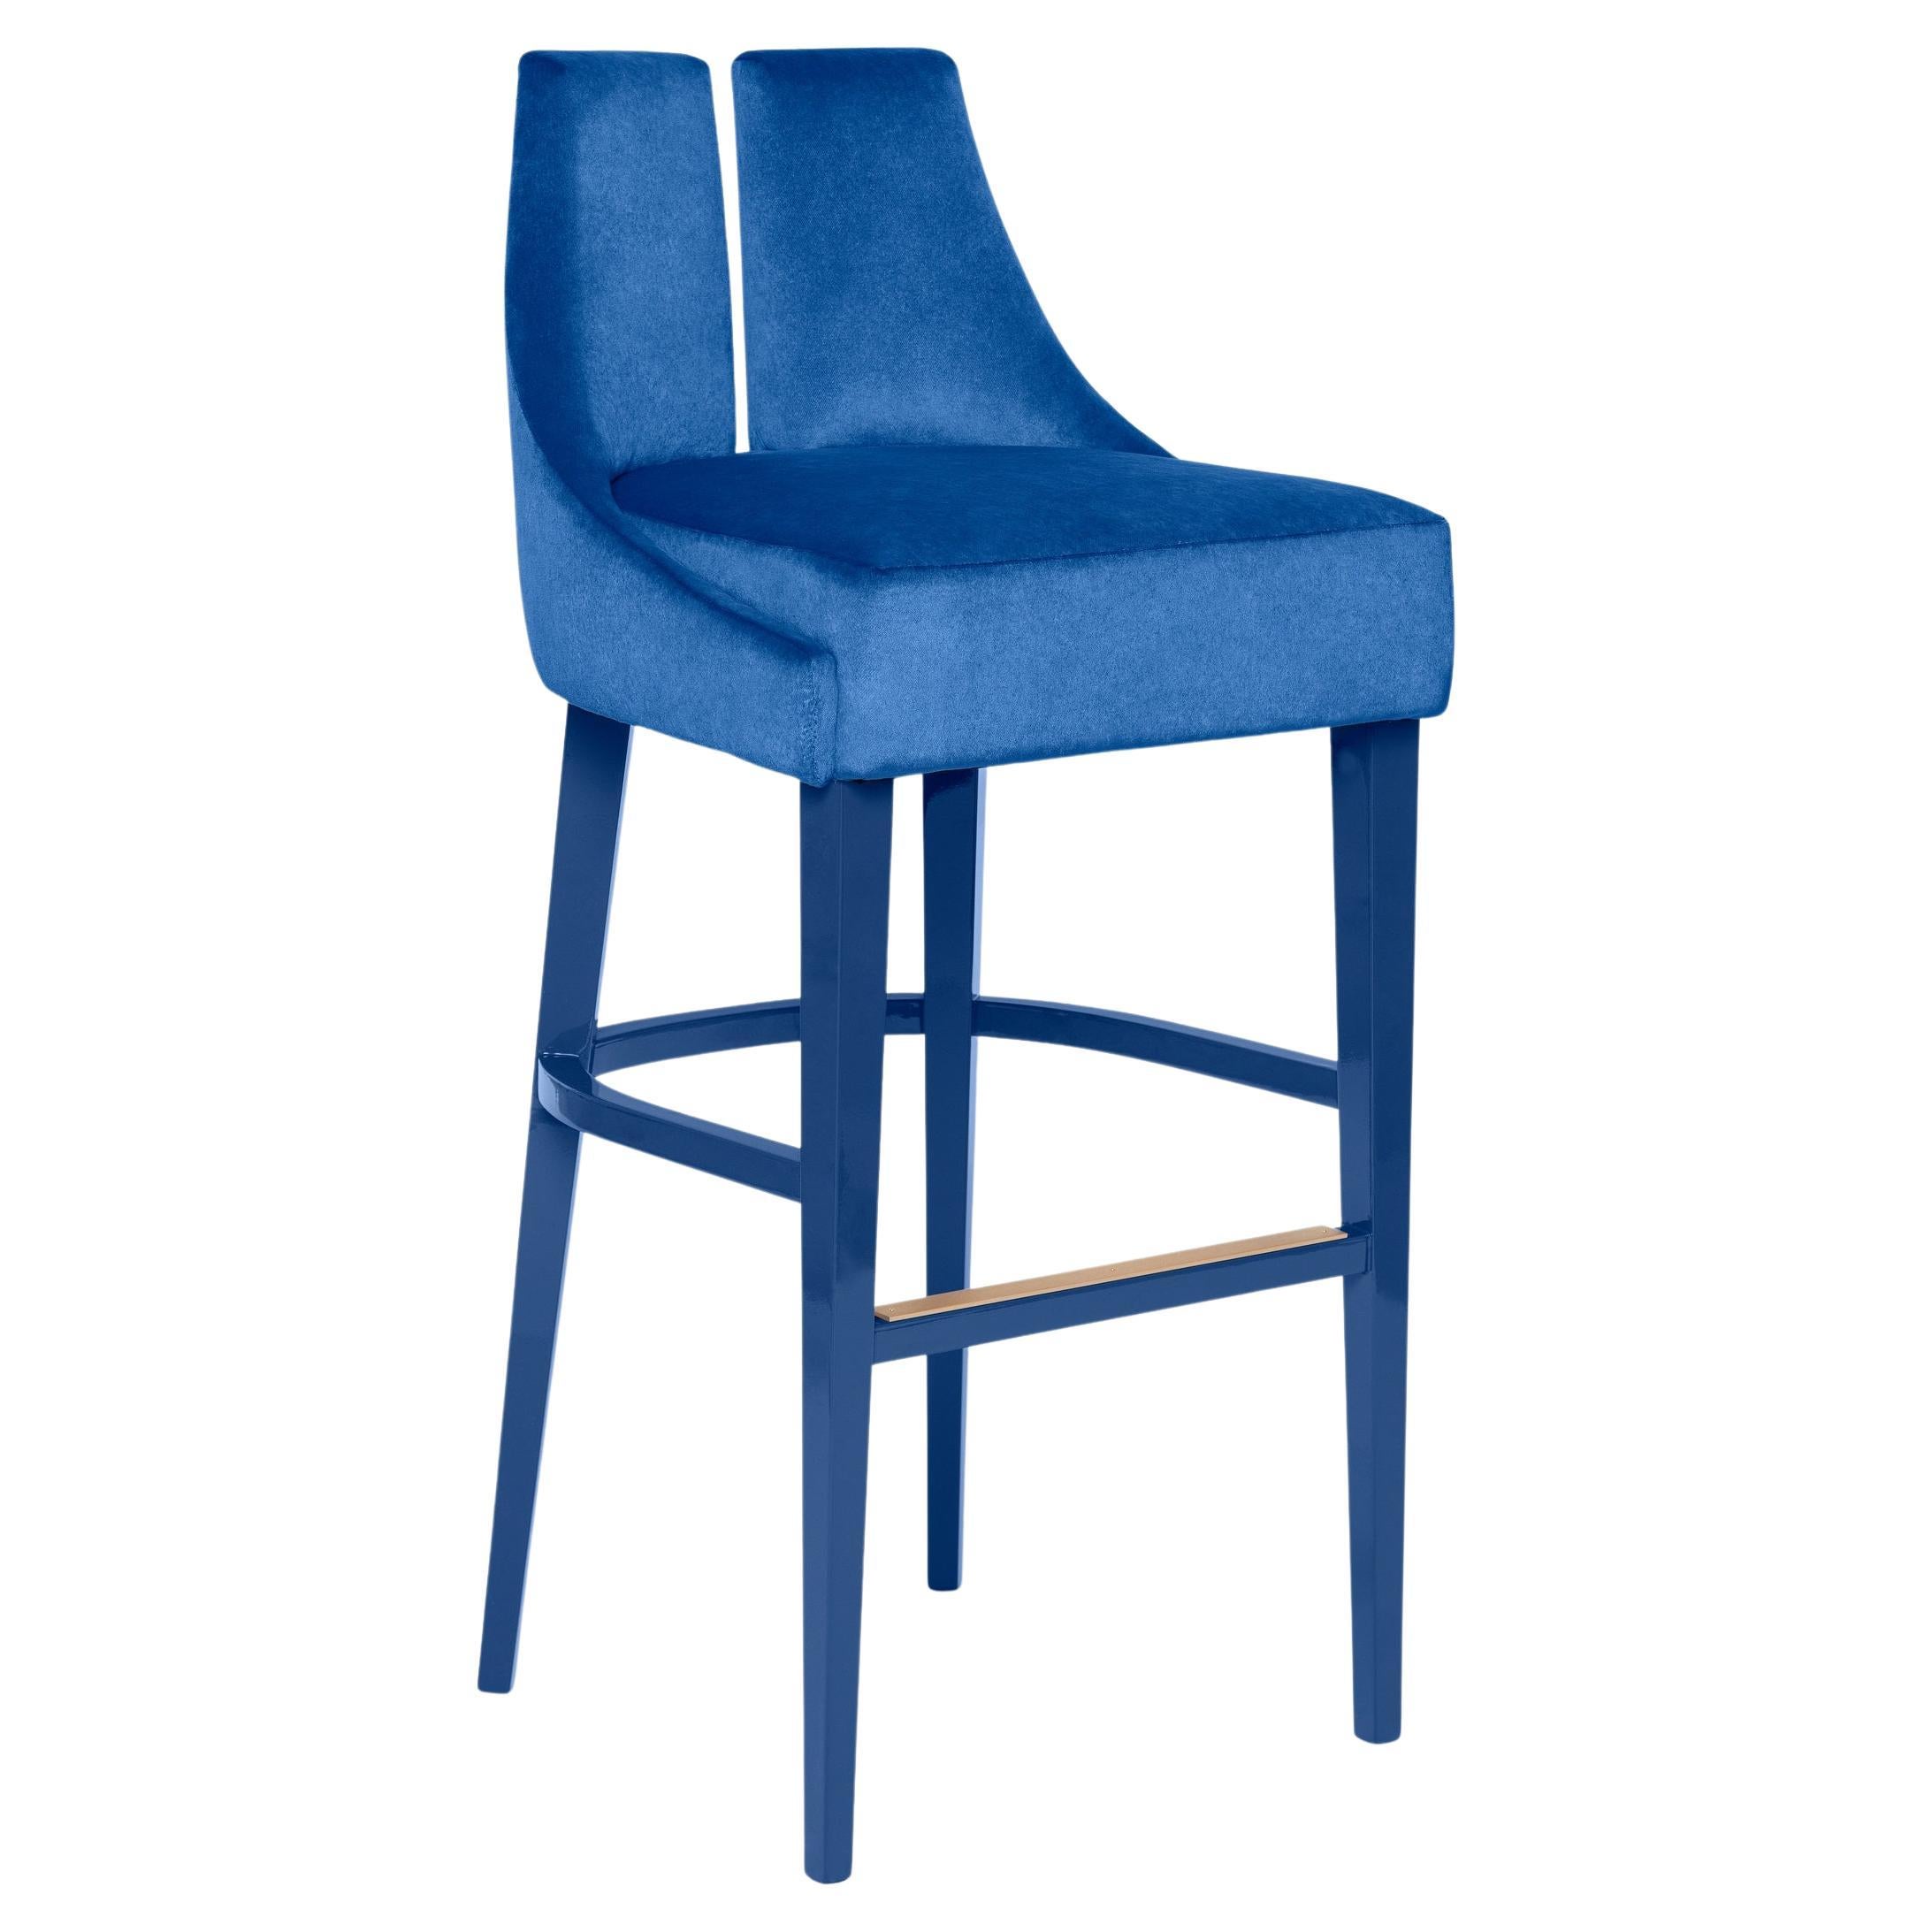 Drawing from the impossibly elegant waistlines of the pin ups, this barstool is a sensuous piece that offers a generous seat . The seaming details are exquisitely crafted, like a silhouette adorning corset.
Available in counter height.
Upholstery: